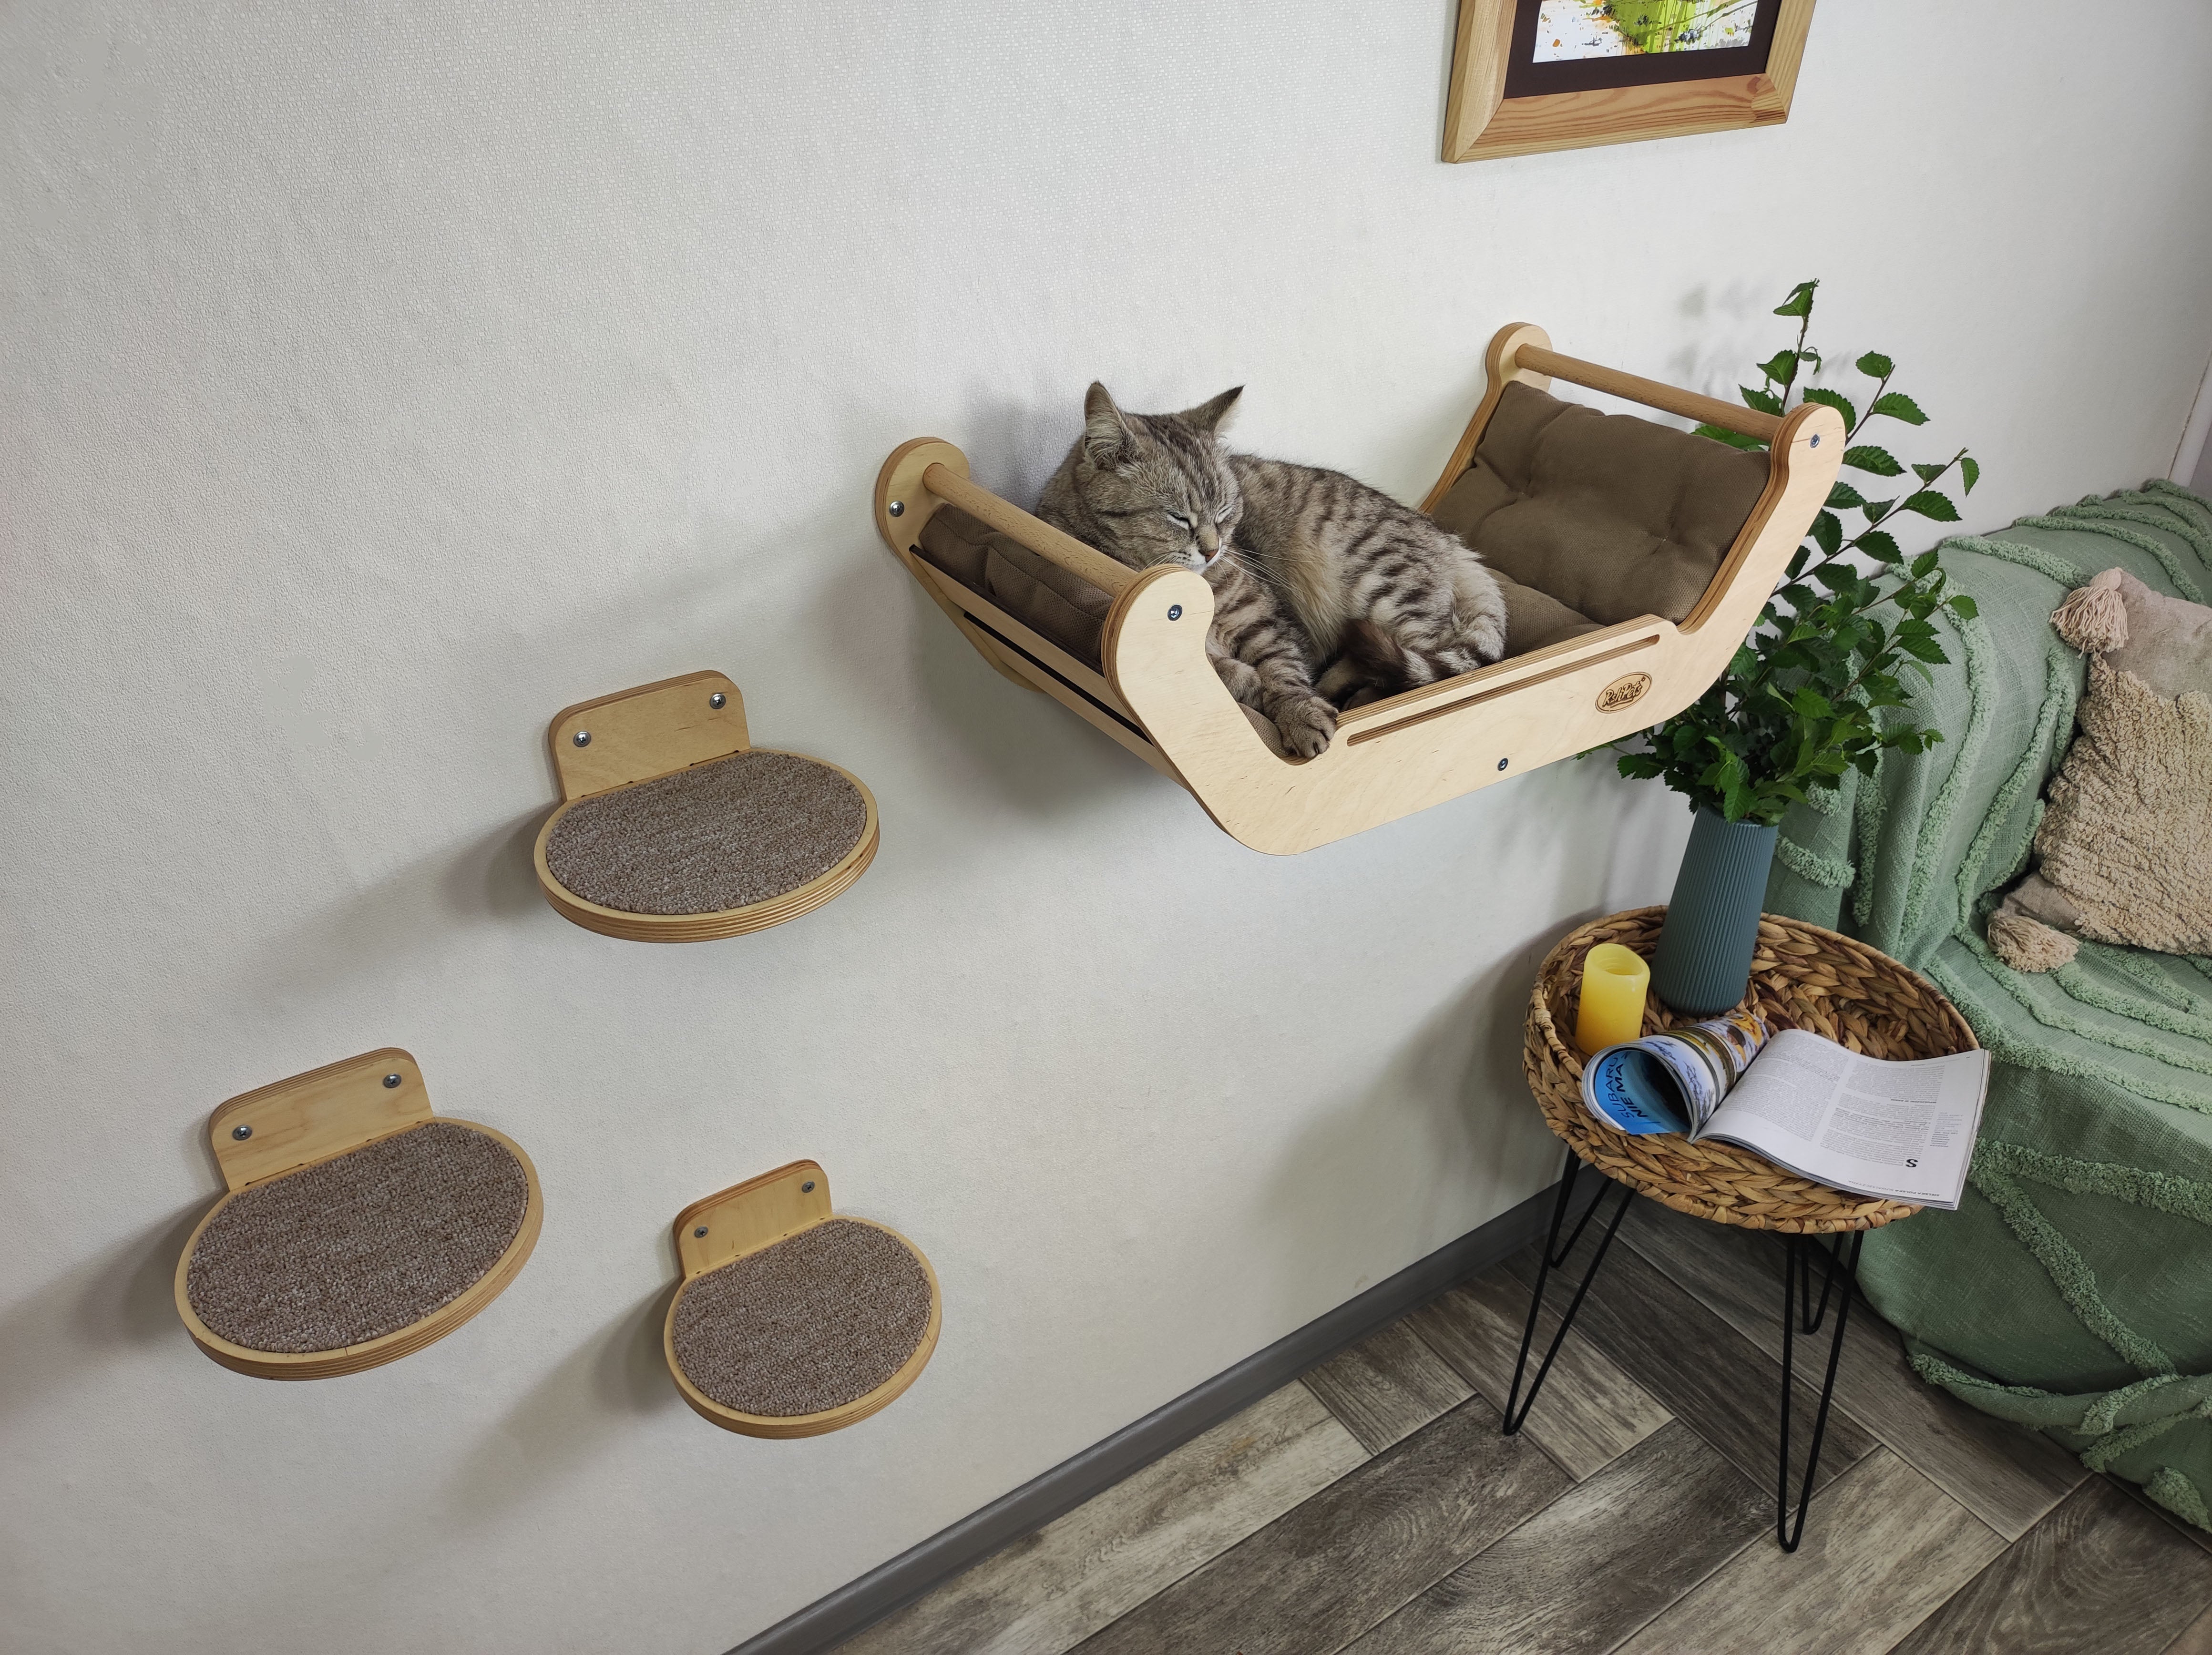 Offer of the Week - Wall-mounted cat set + Wall cat bridge "S"